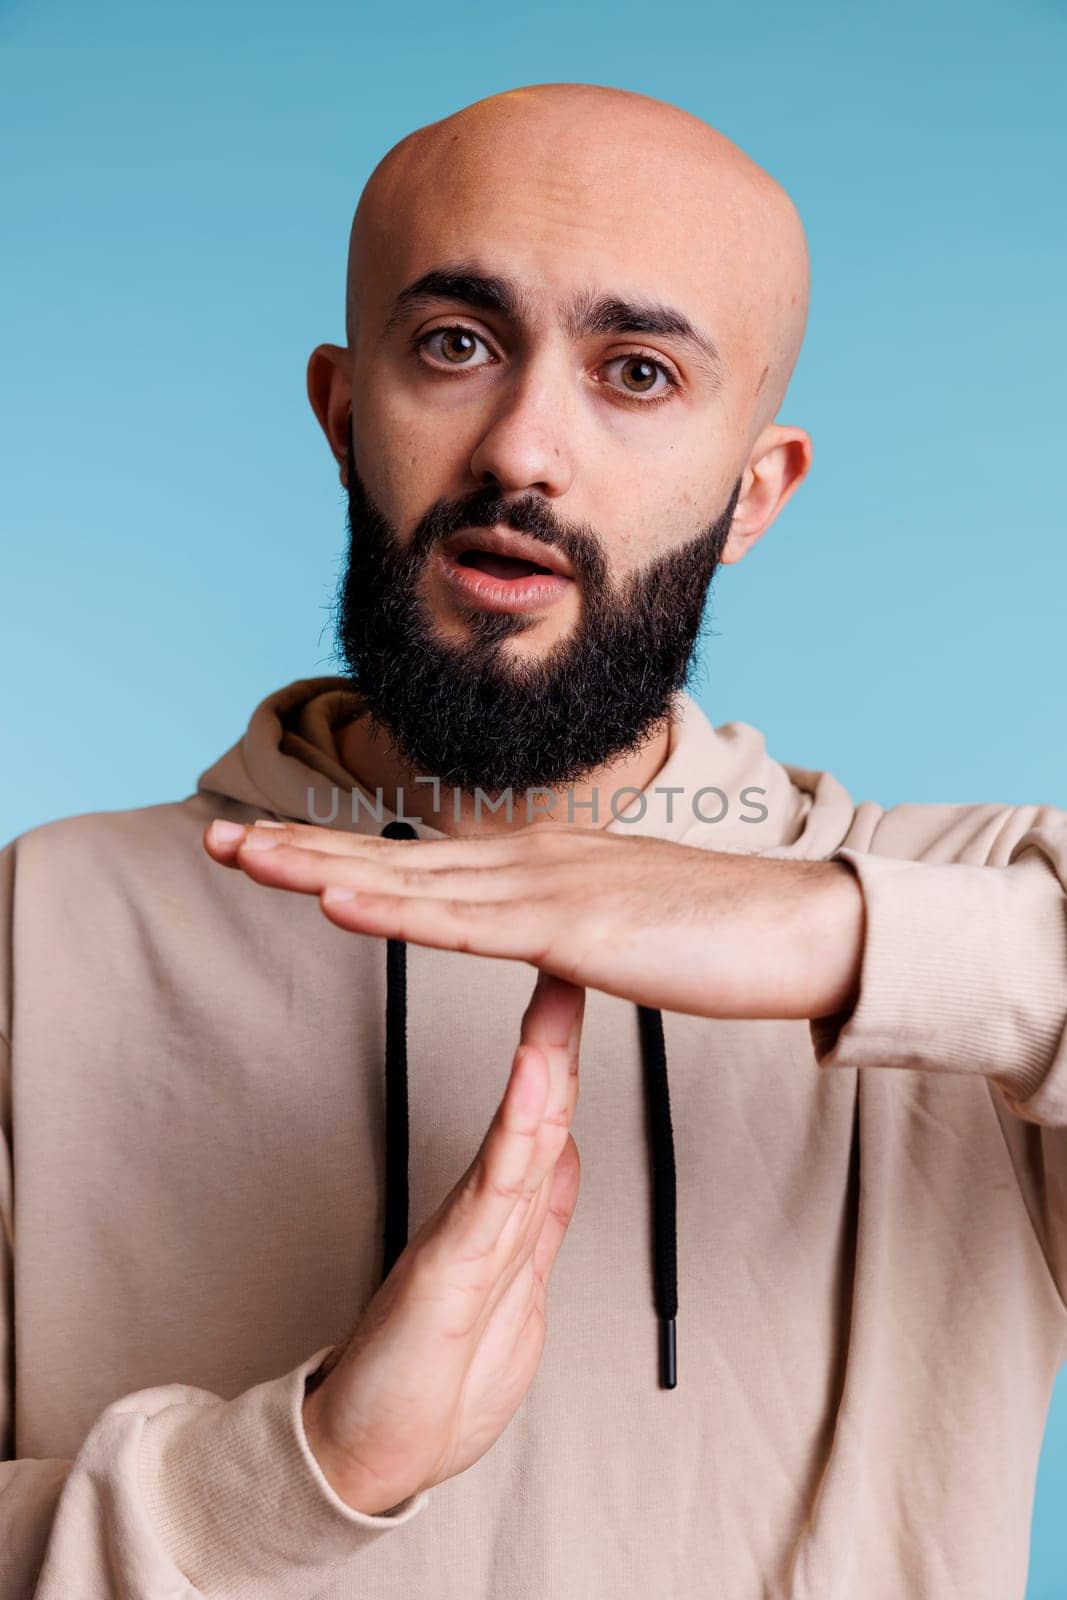 Arabian person taking time out with stop signal while showing confident facial expression portrait. Young bald bearded man making interruption gesture with hands while looking at camera